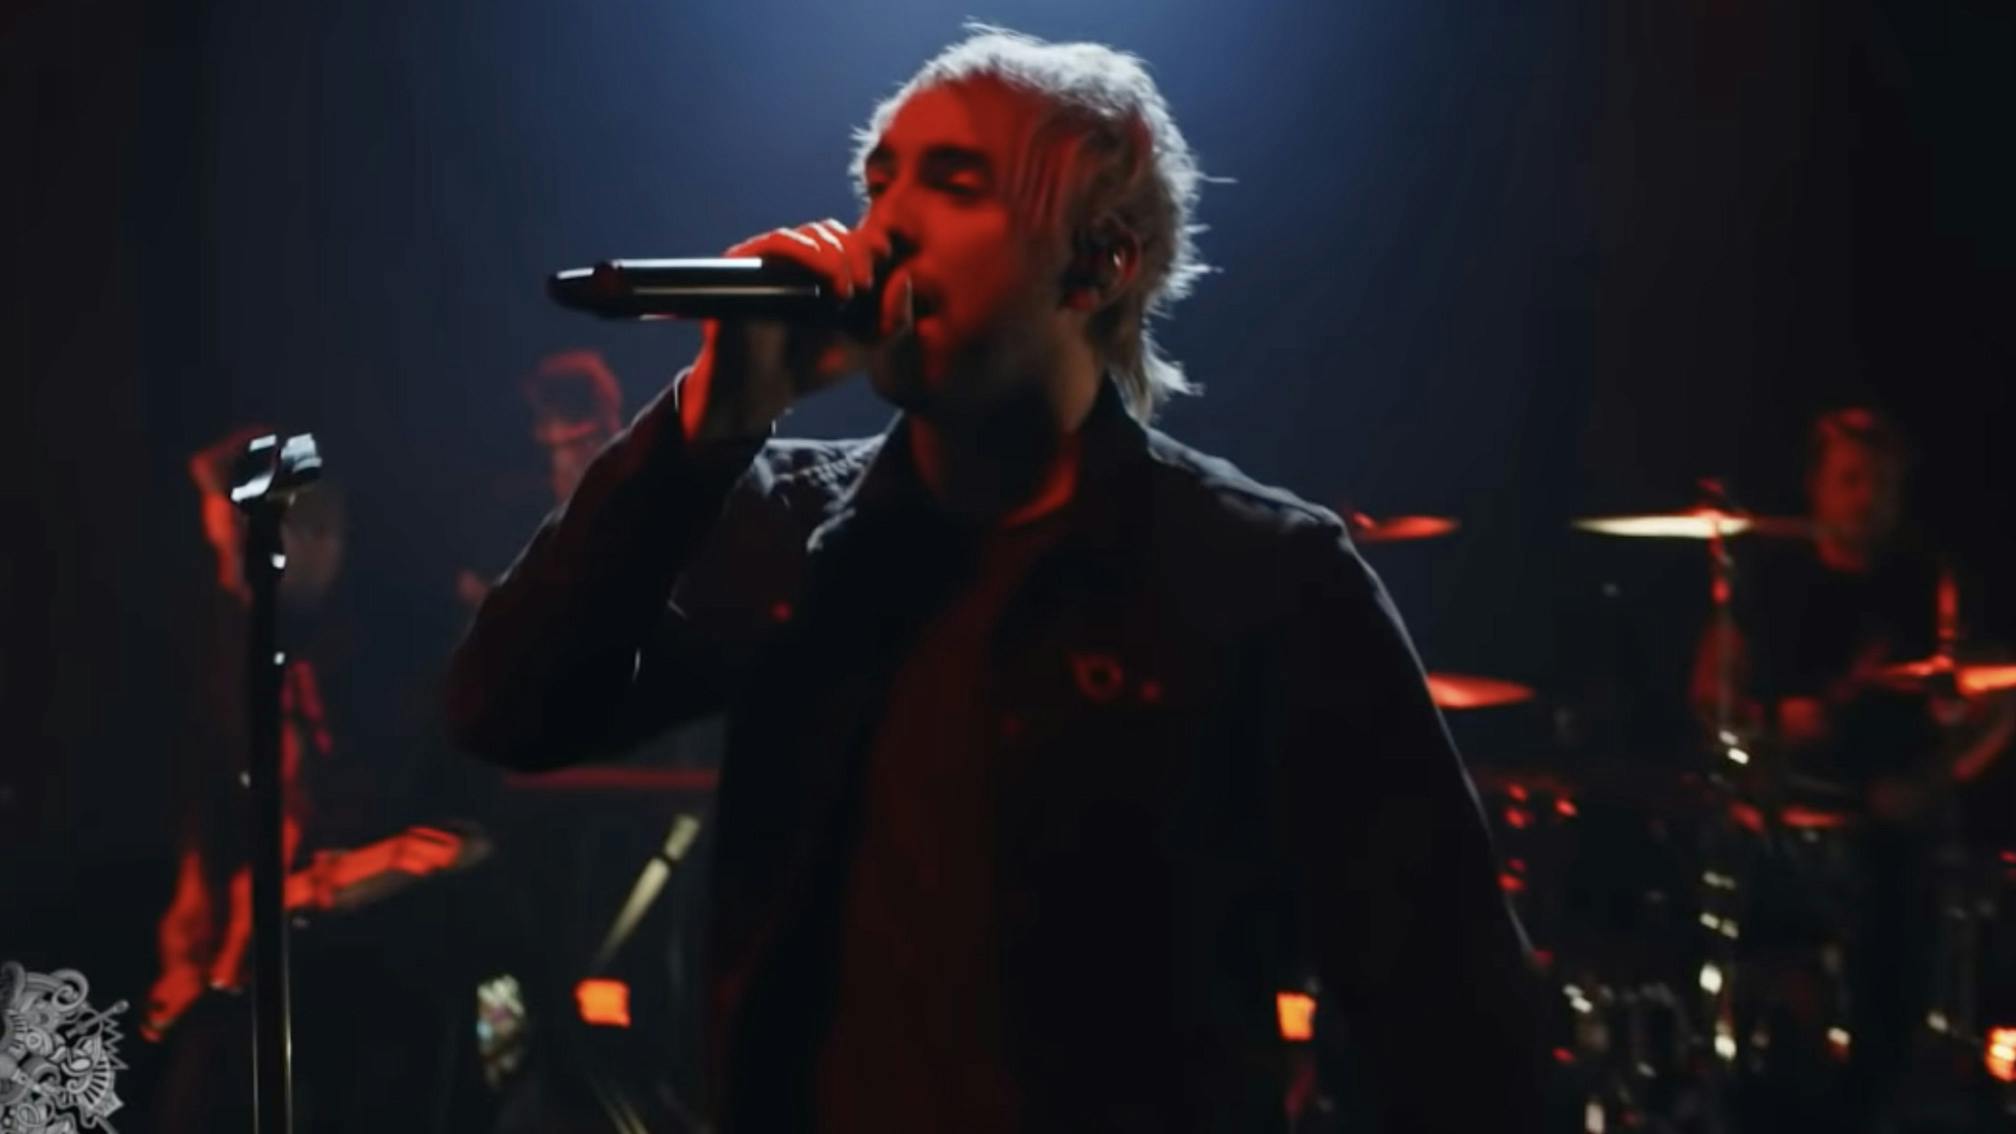 Watch All Time Low's slick performance on Jimmy Kimmel Live